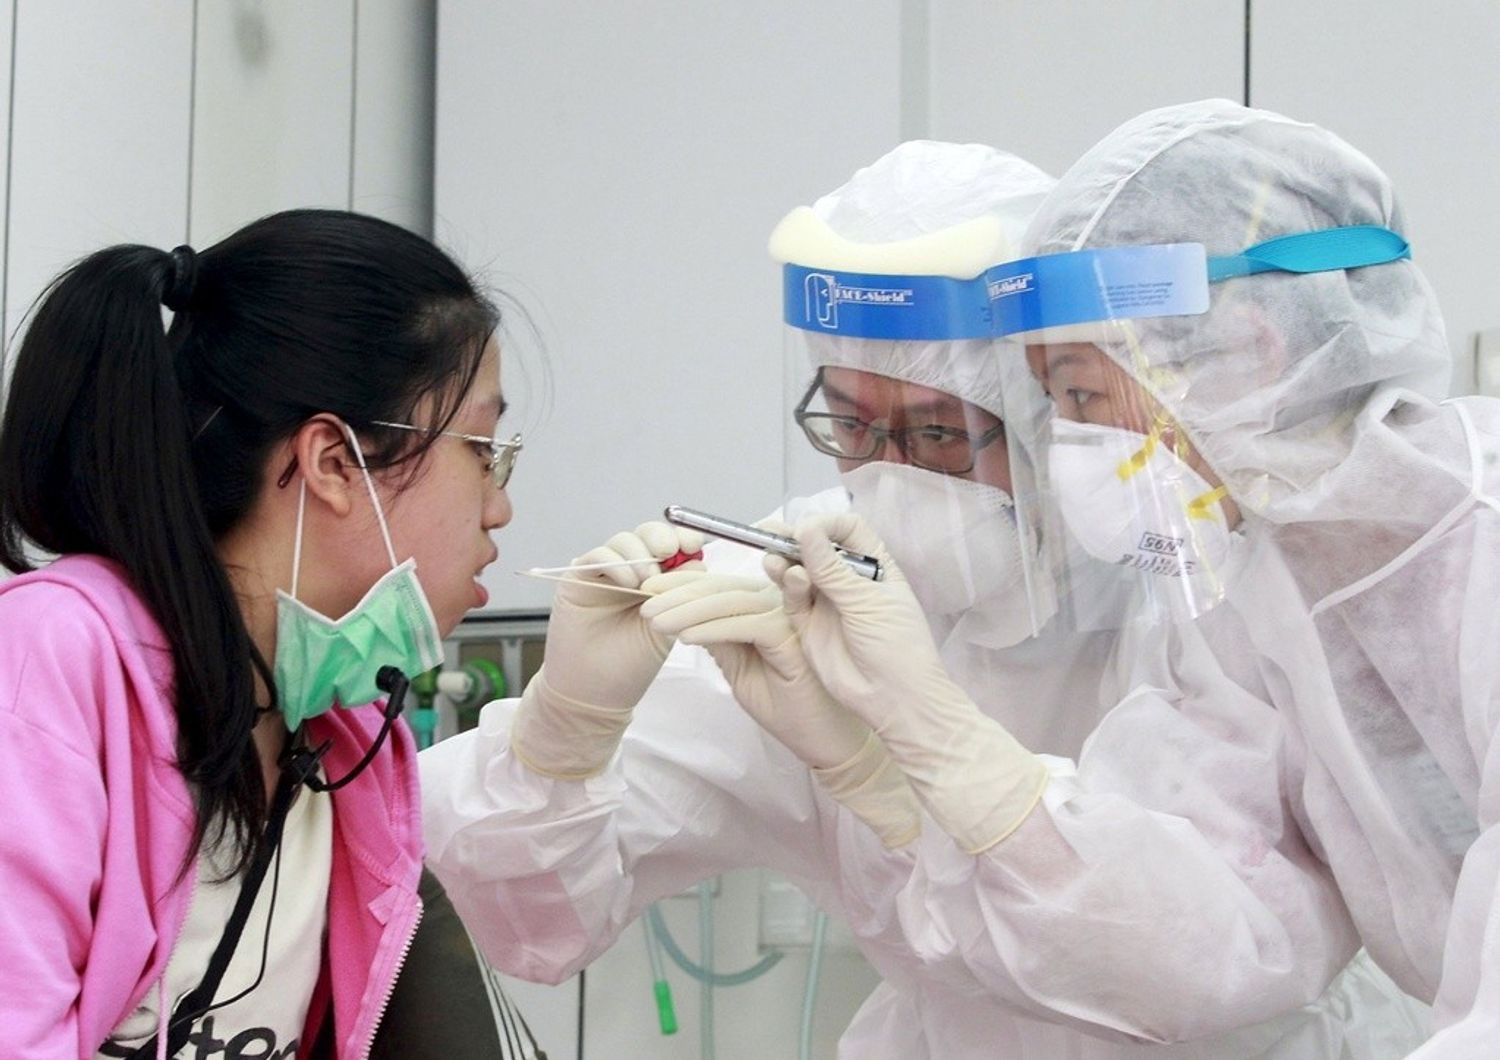 MERS CoV a "wake-up call", says WHO